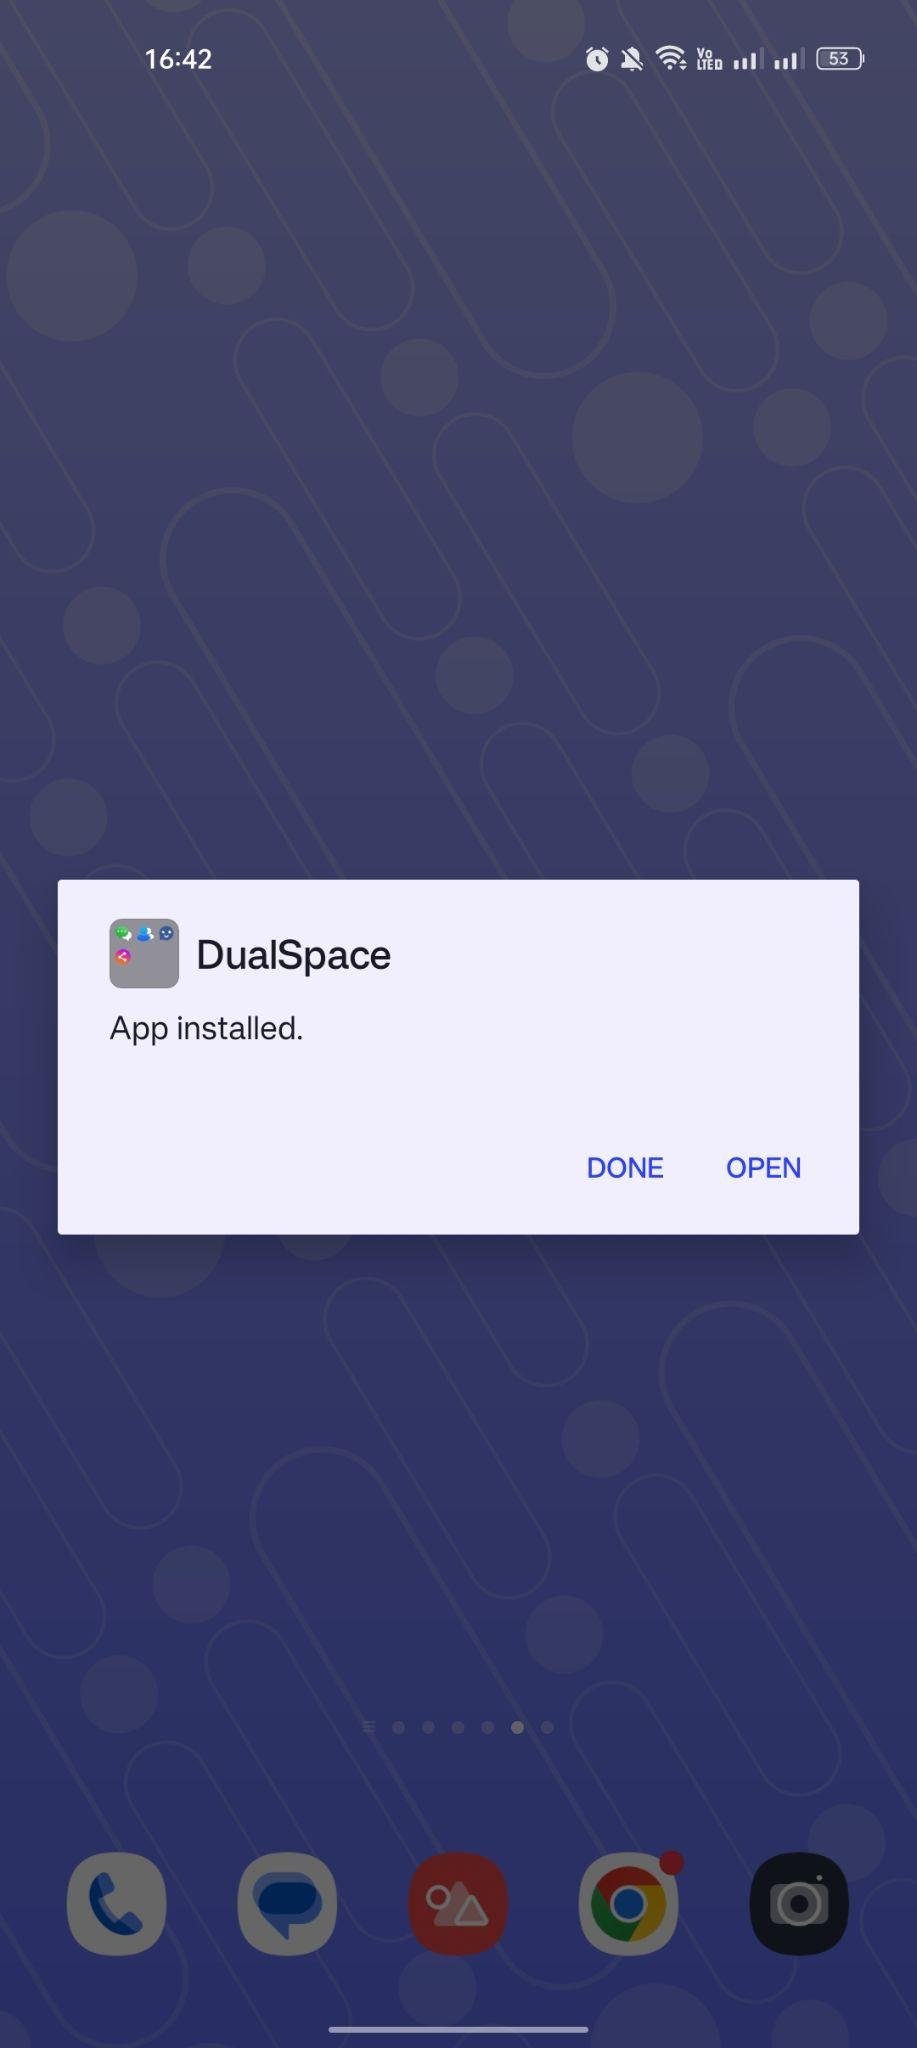 Dual Space Pro apk installed